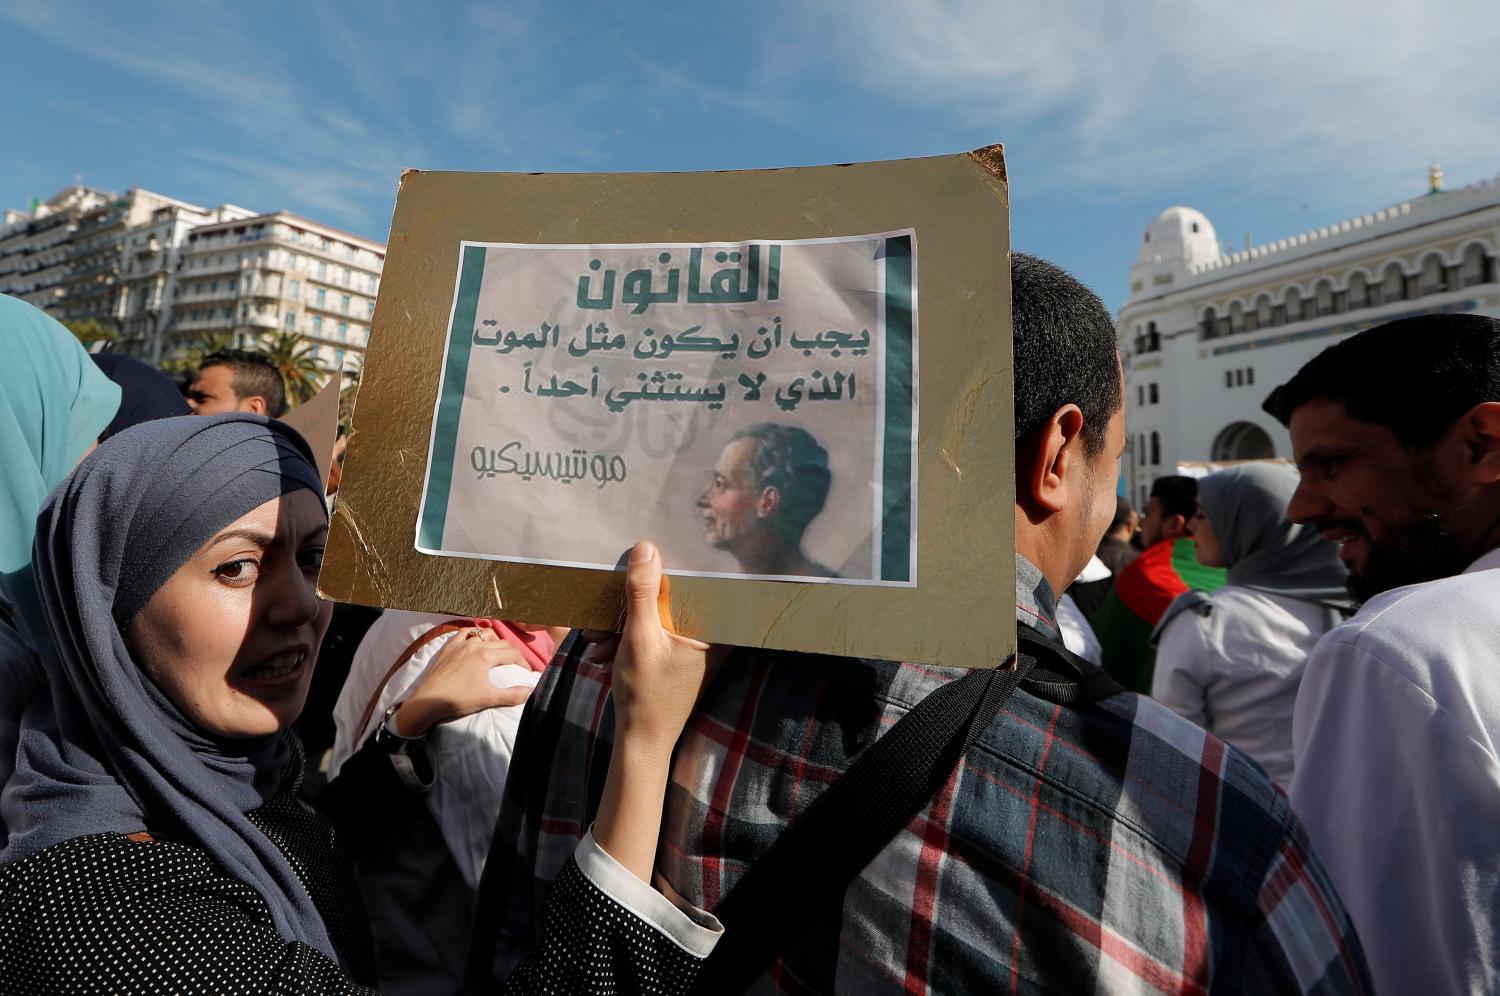 A demonstrator carries a sign as teachers and students take part in a protest demanding immediate political change in Algiers, Algeria March 13, 2019. The sign reads: "The law should be like death, which spares no one". REUTERS/Zohra Bensemra - RC1D6736BA50